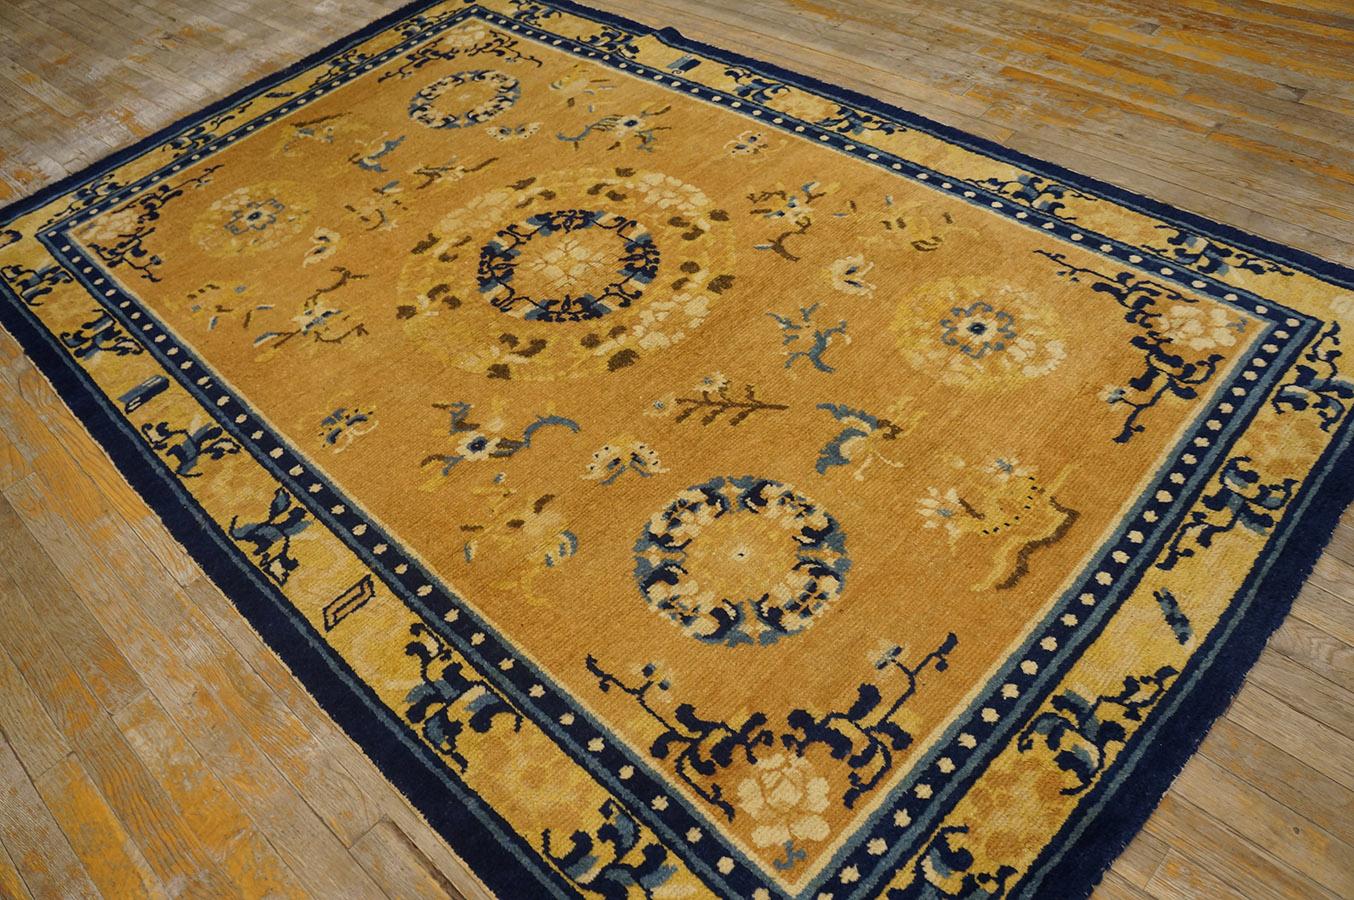 Late 18th Century Chinese Ningxia Carpet ( 5' x 8' 1'' - 152 x 246 cm ) In Good Condition For Sale In New York, NY